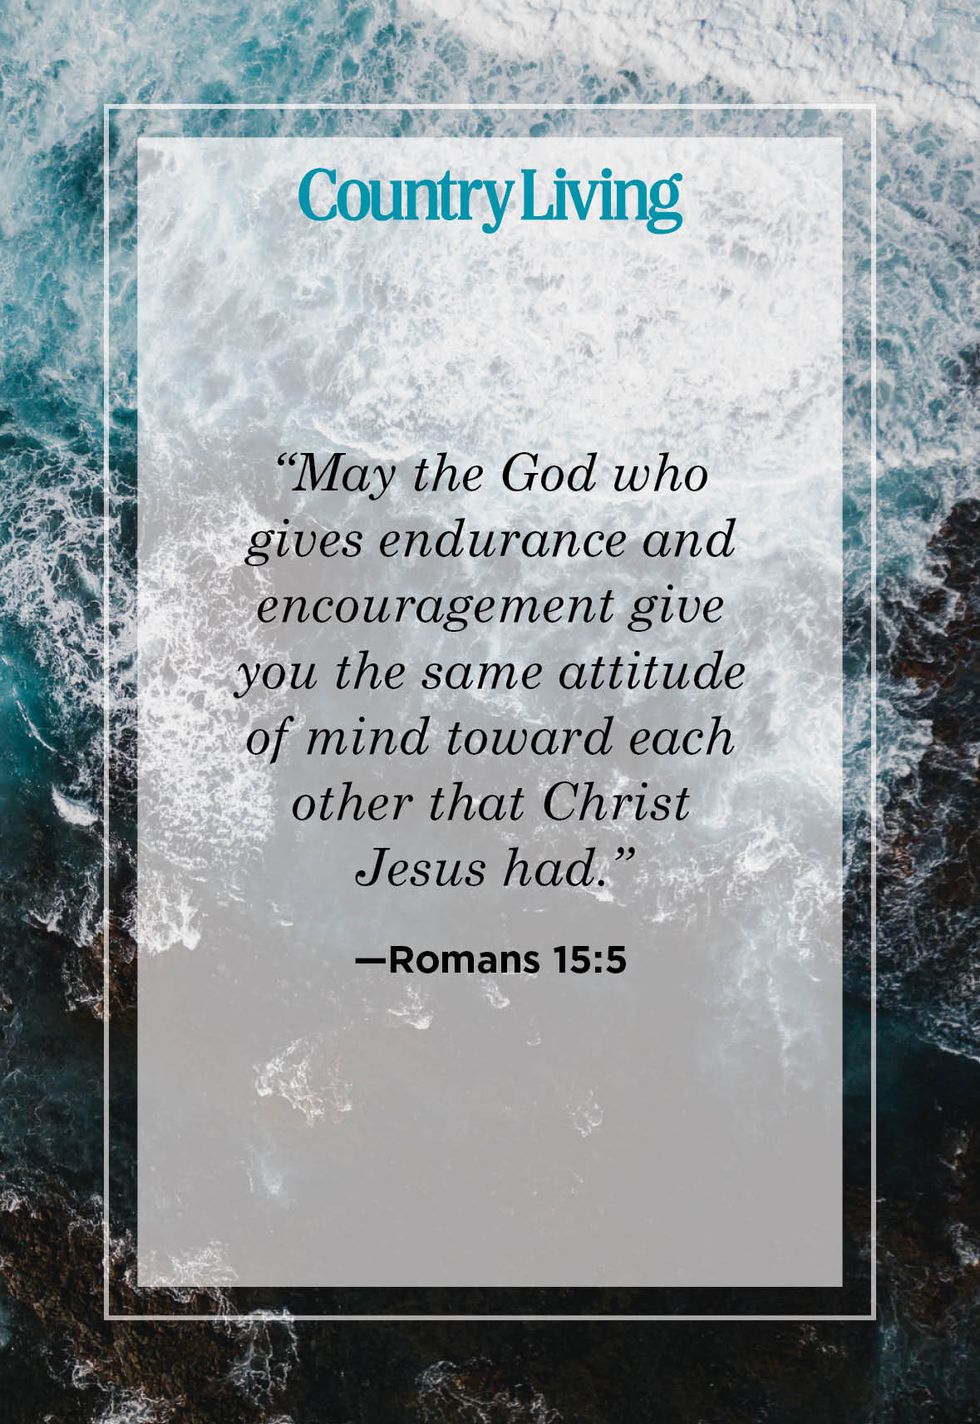 may the god who gives endurance and encouragement give you the same attitude of mind toward each other that christ jesus had from romans